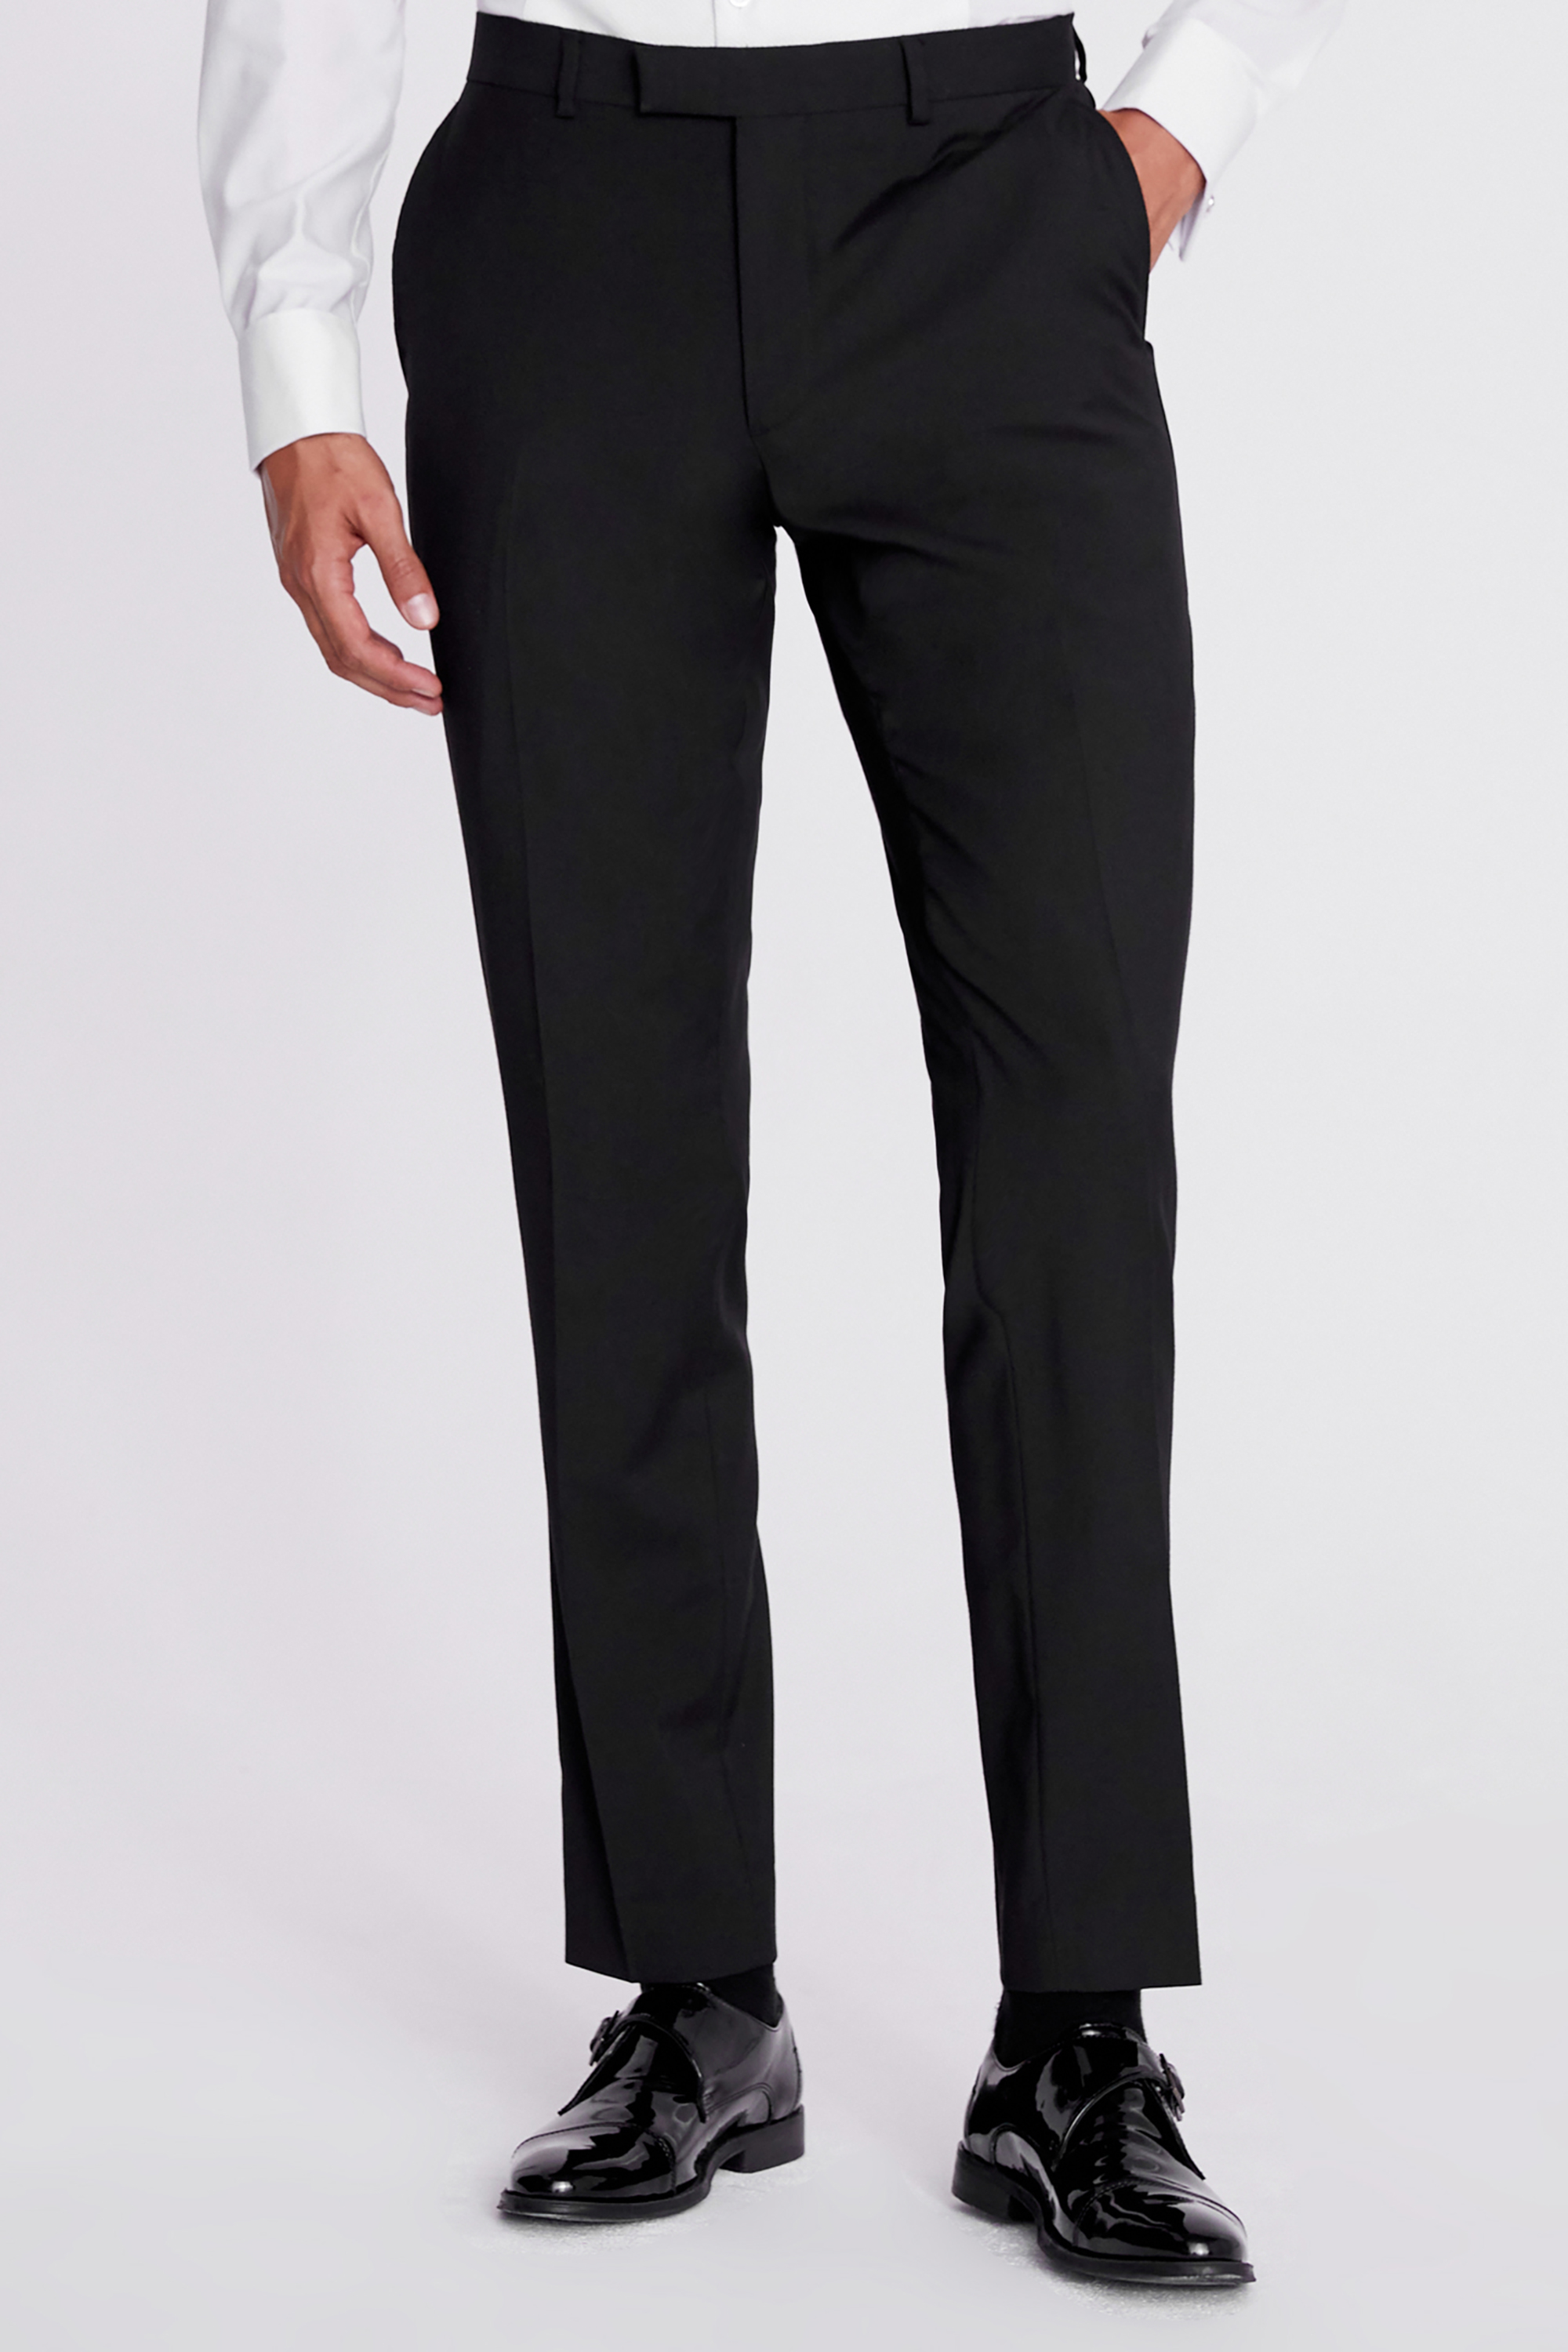 Slim Fit Black Dress Trousers | Buy Online at Moss